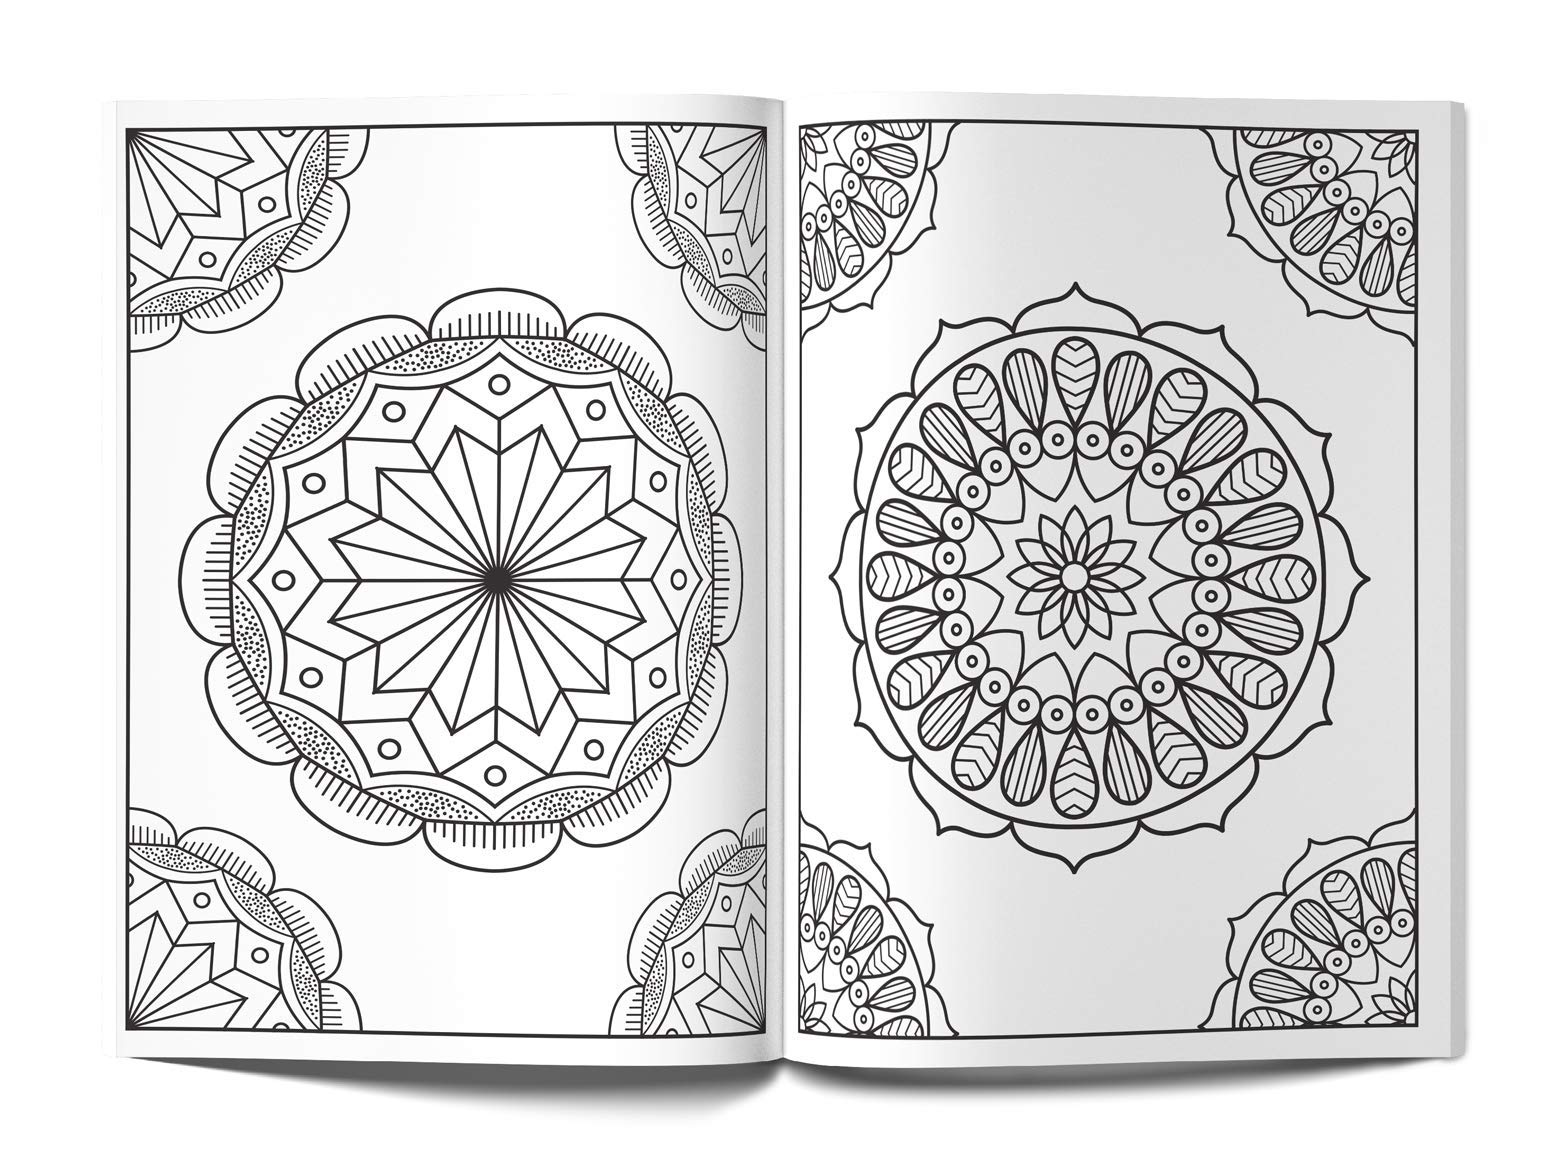 Creative Coloring Mandala For Kids (Coloring Book To Improve Concentration A)